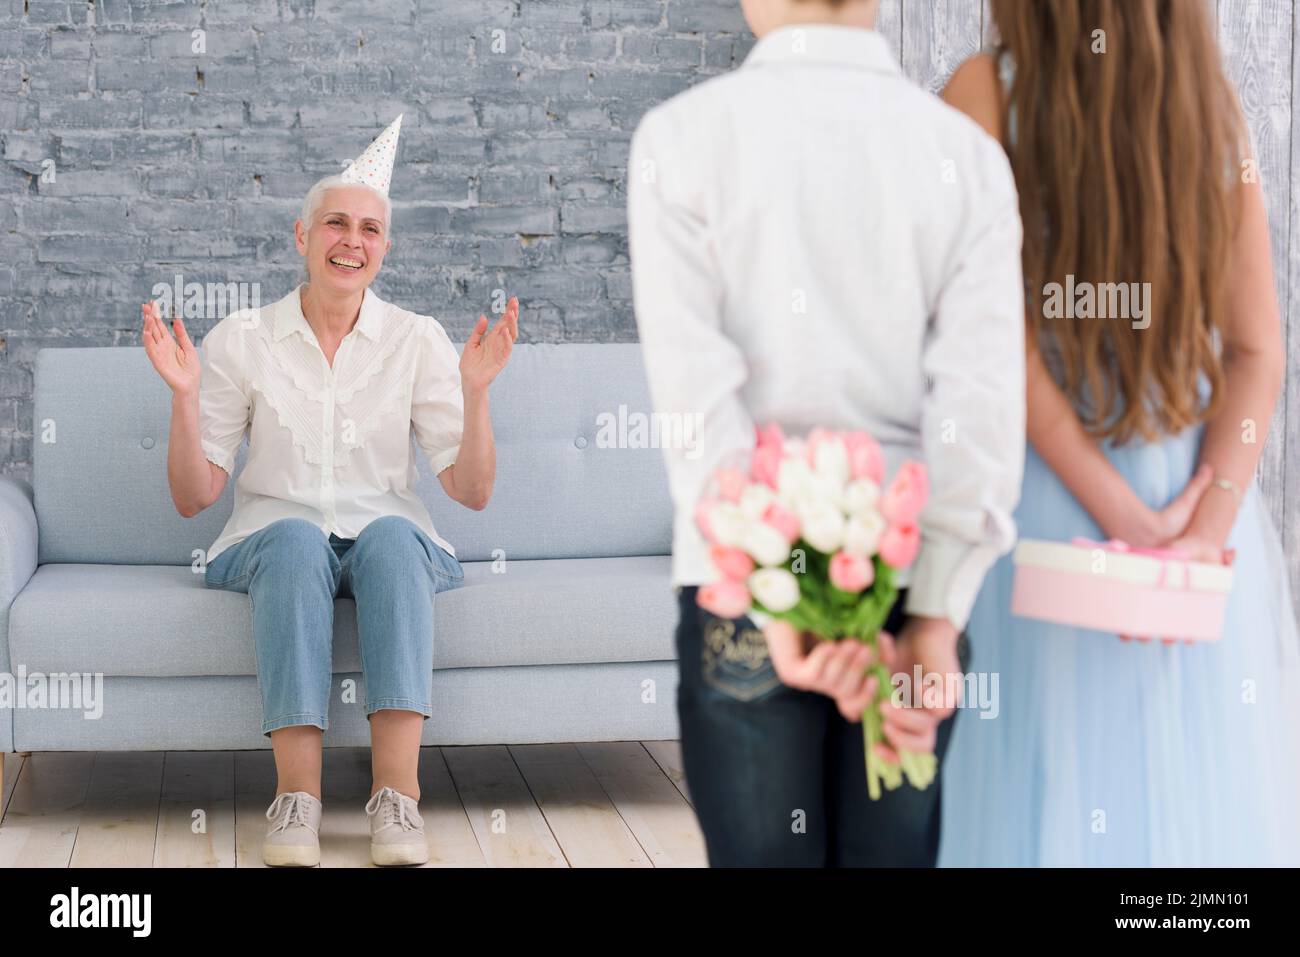 Children hiding gifts their back standing front their grand mother Stock Photo